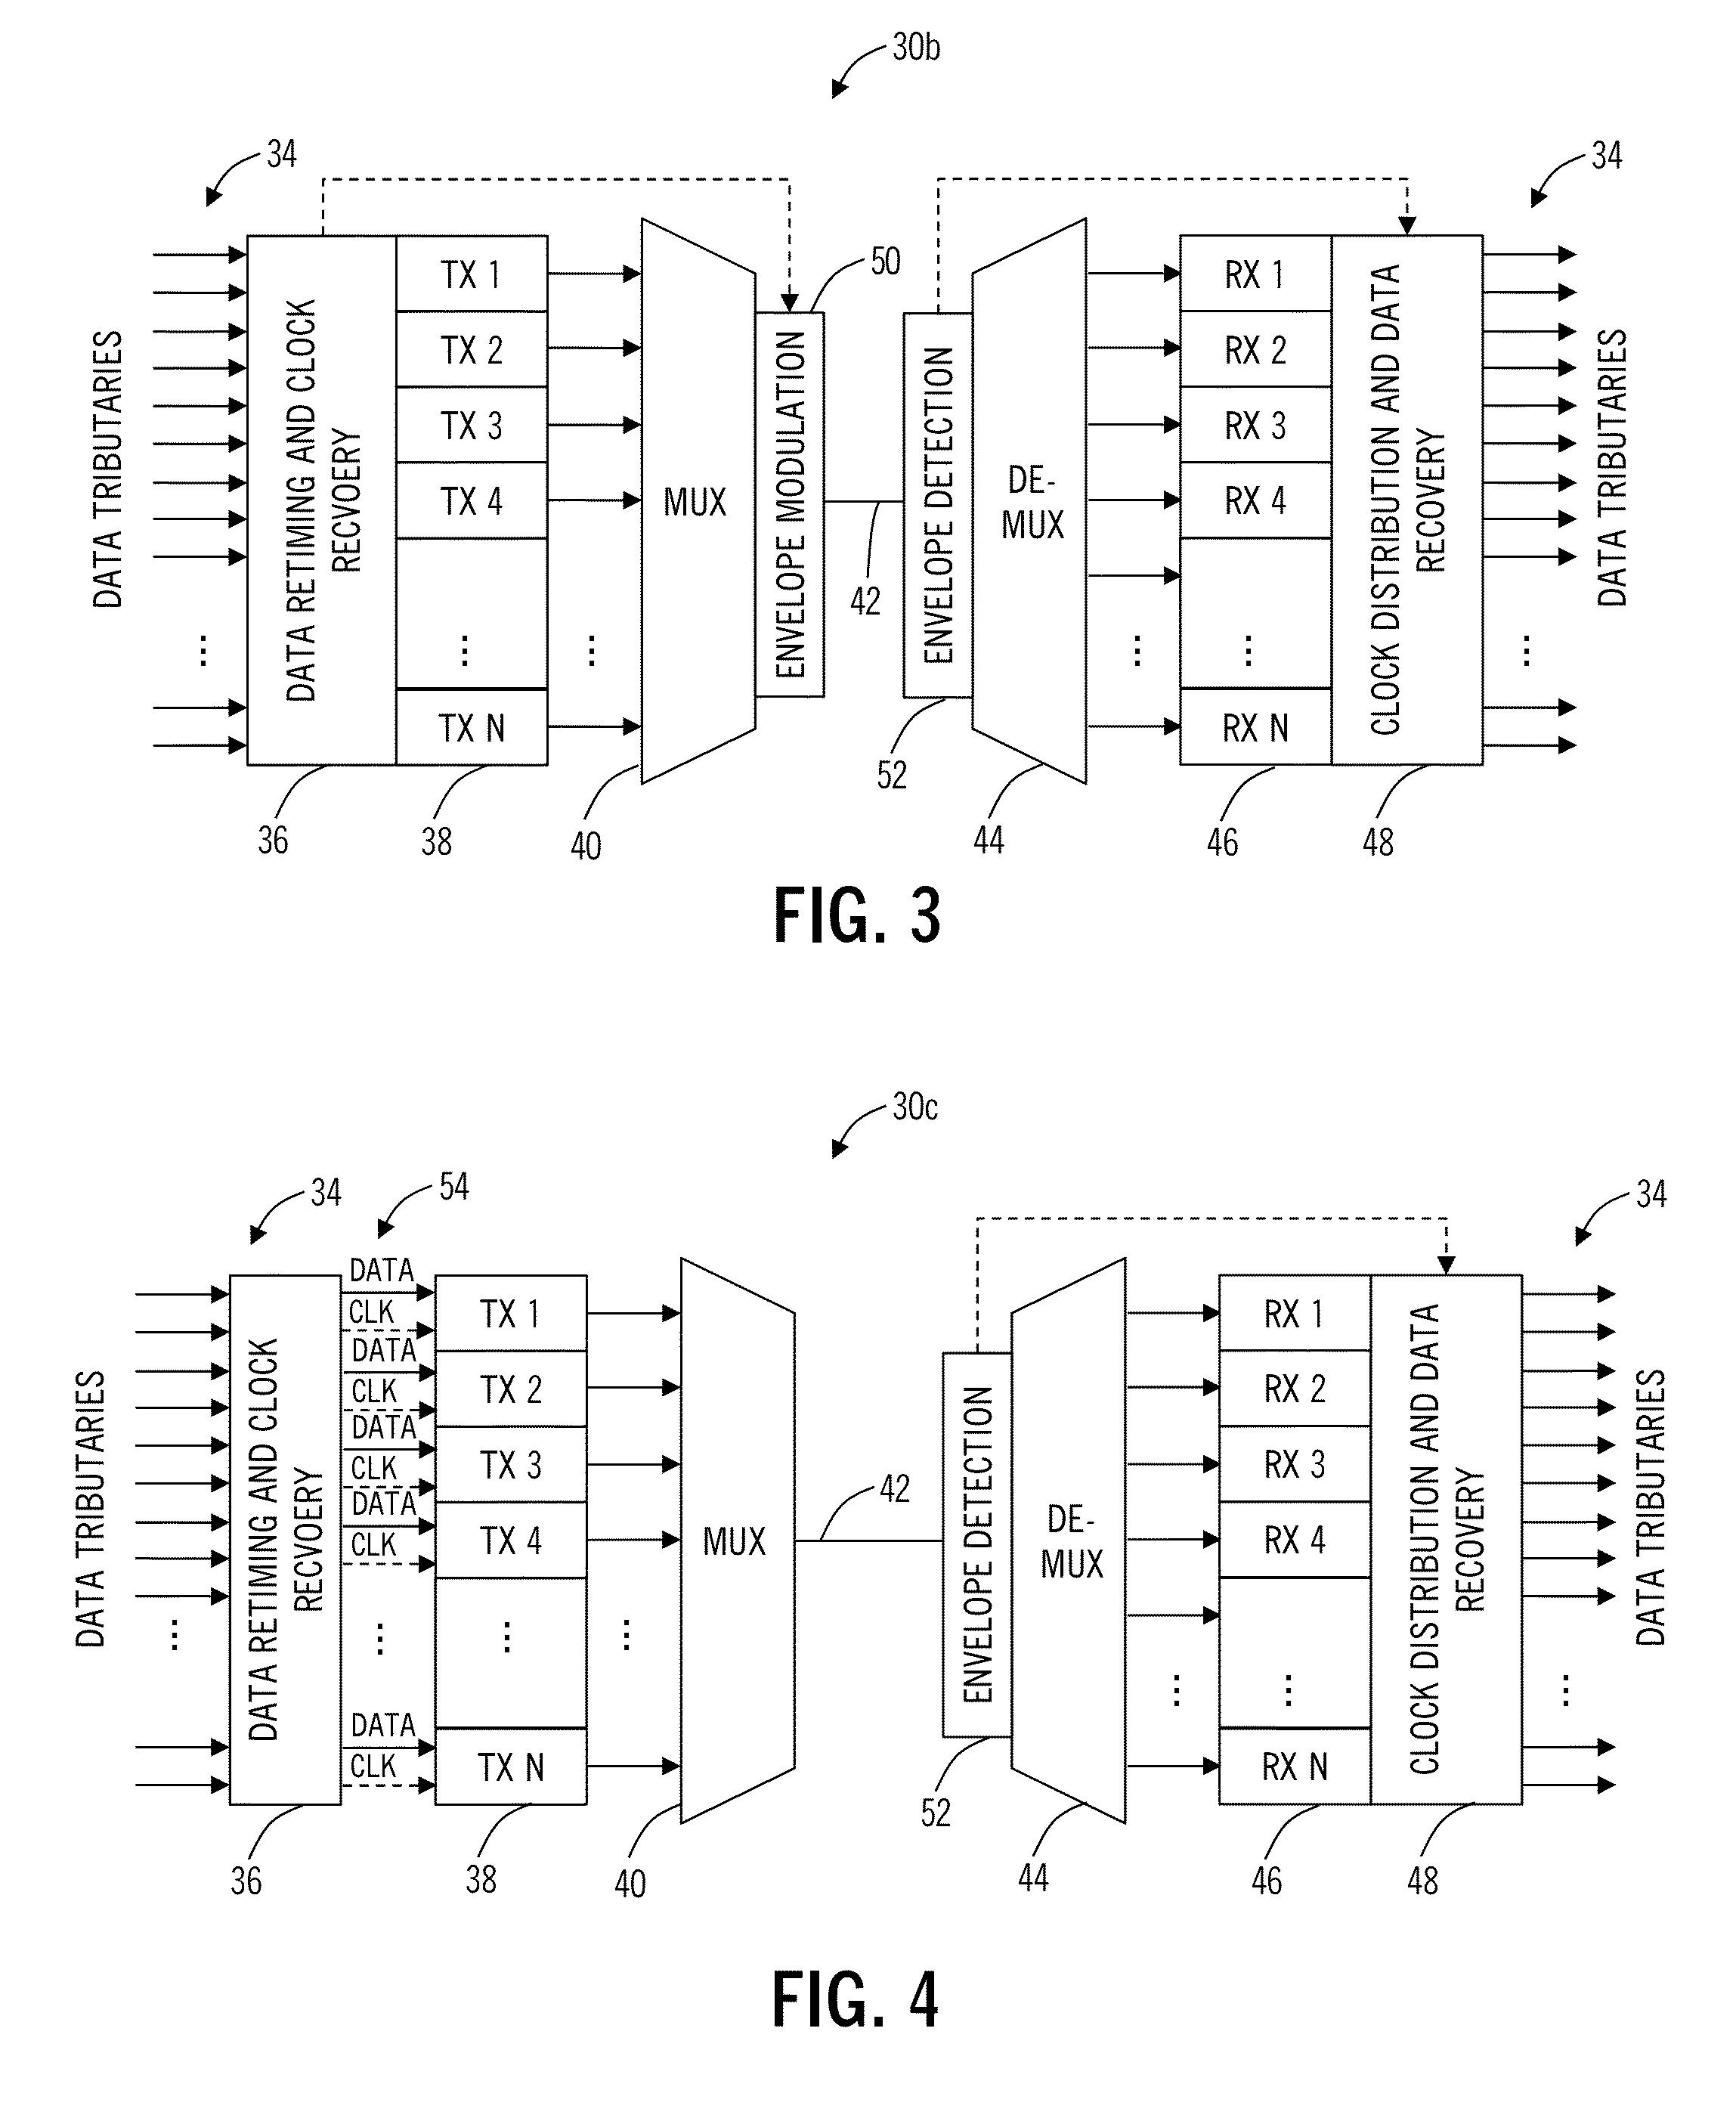 Optical transceiver and method with channel binding, clock forwarding, and integrate-and-dump receivers